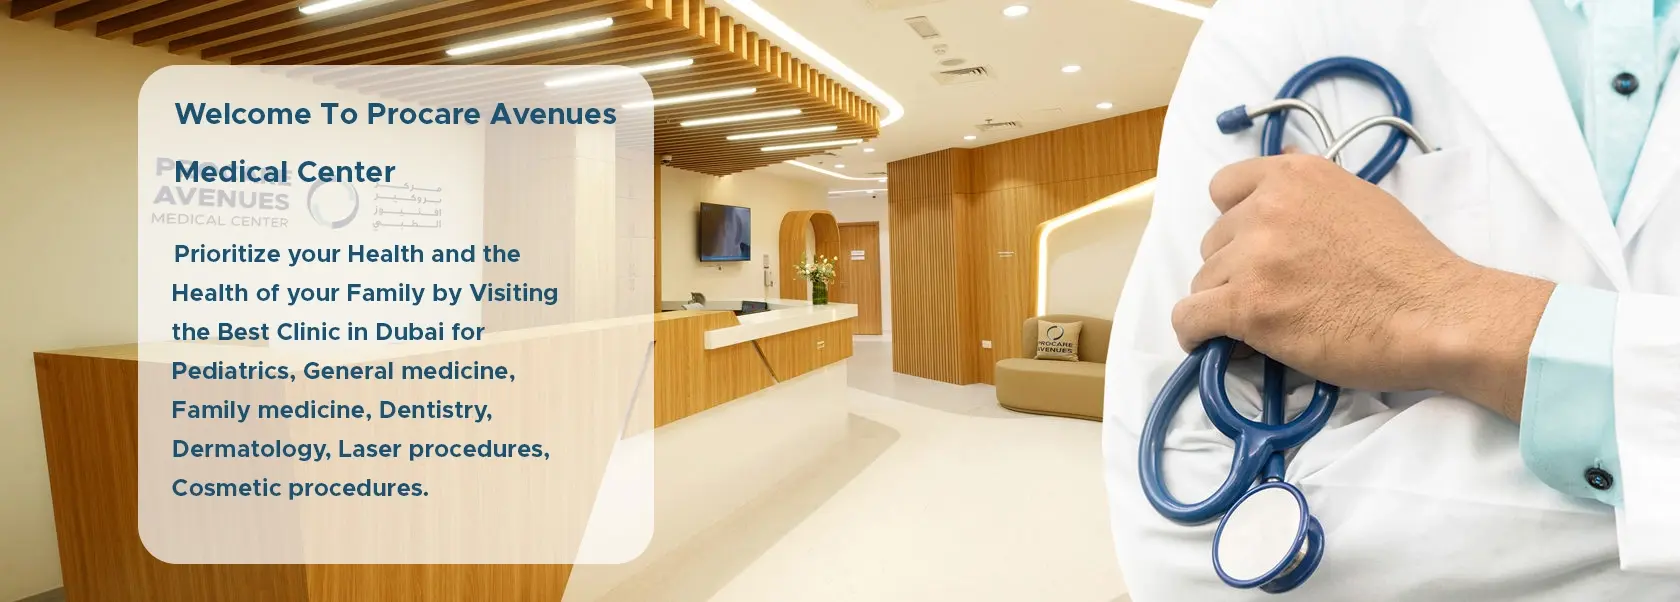 Procare Avenue Medical Center. Prioritize your health and the health of your family by visiting the best clinic in Dubai for pediatrics, general medicine, family medicine, dentistry, dermatology, laser procedures, and cosmetic procedures.